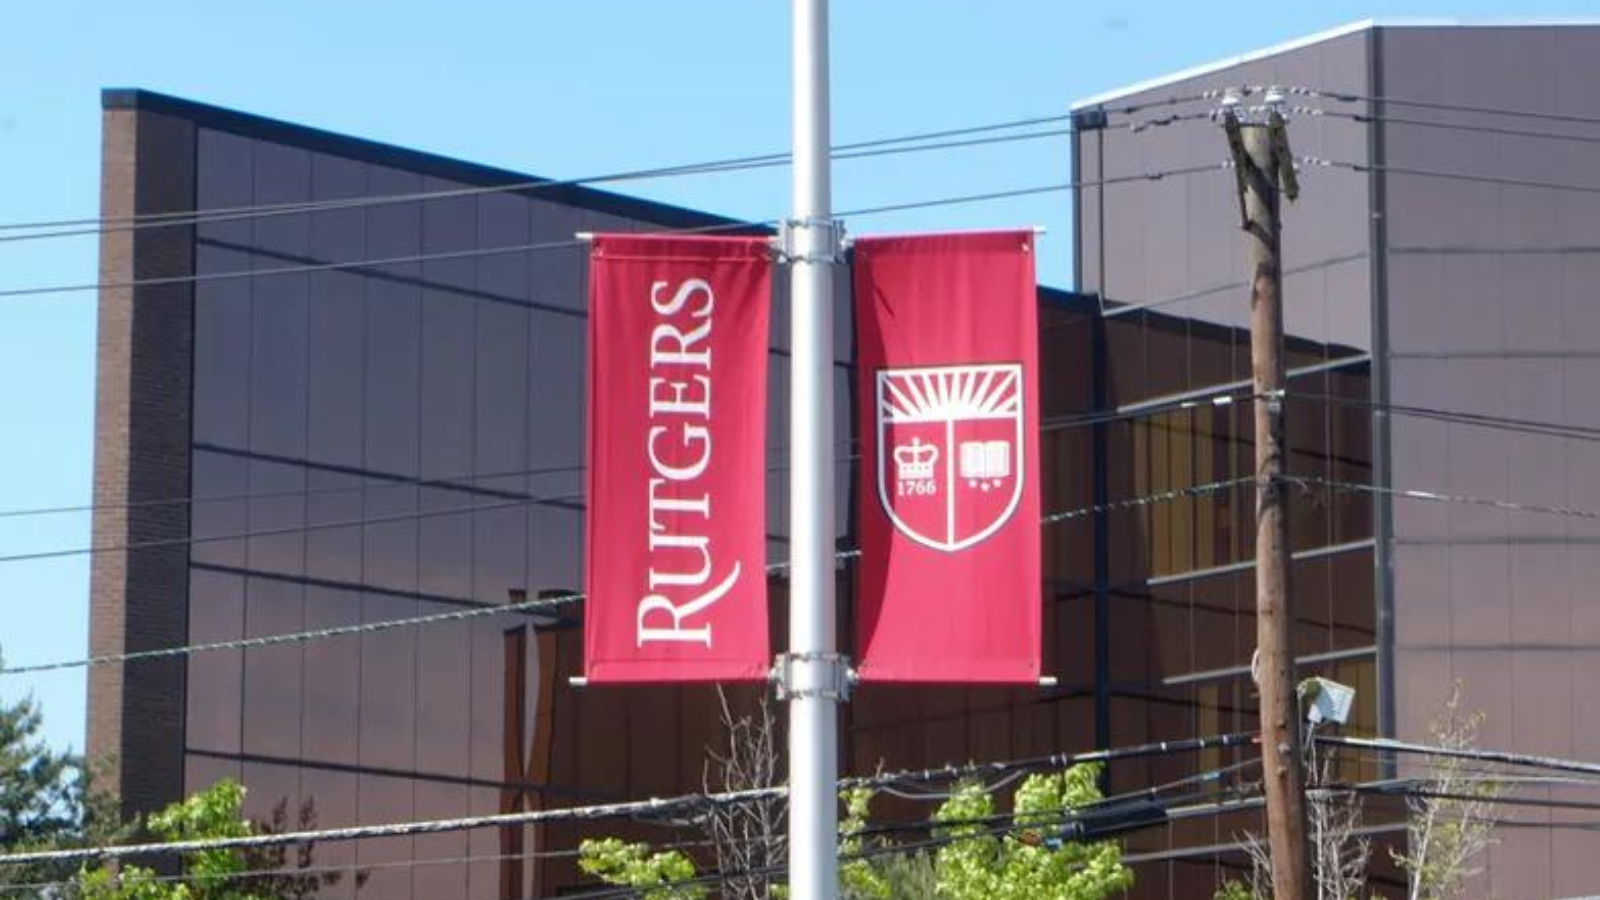 NJ man accused of vandalizing Rutgers Islamic student center charged with federal hate crime